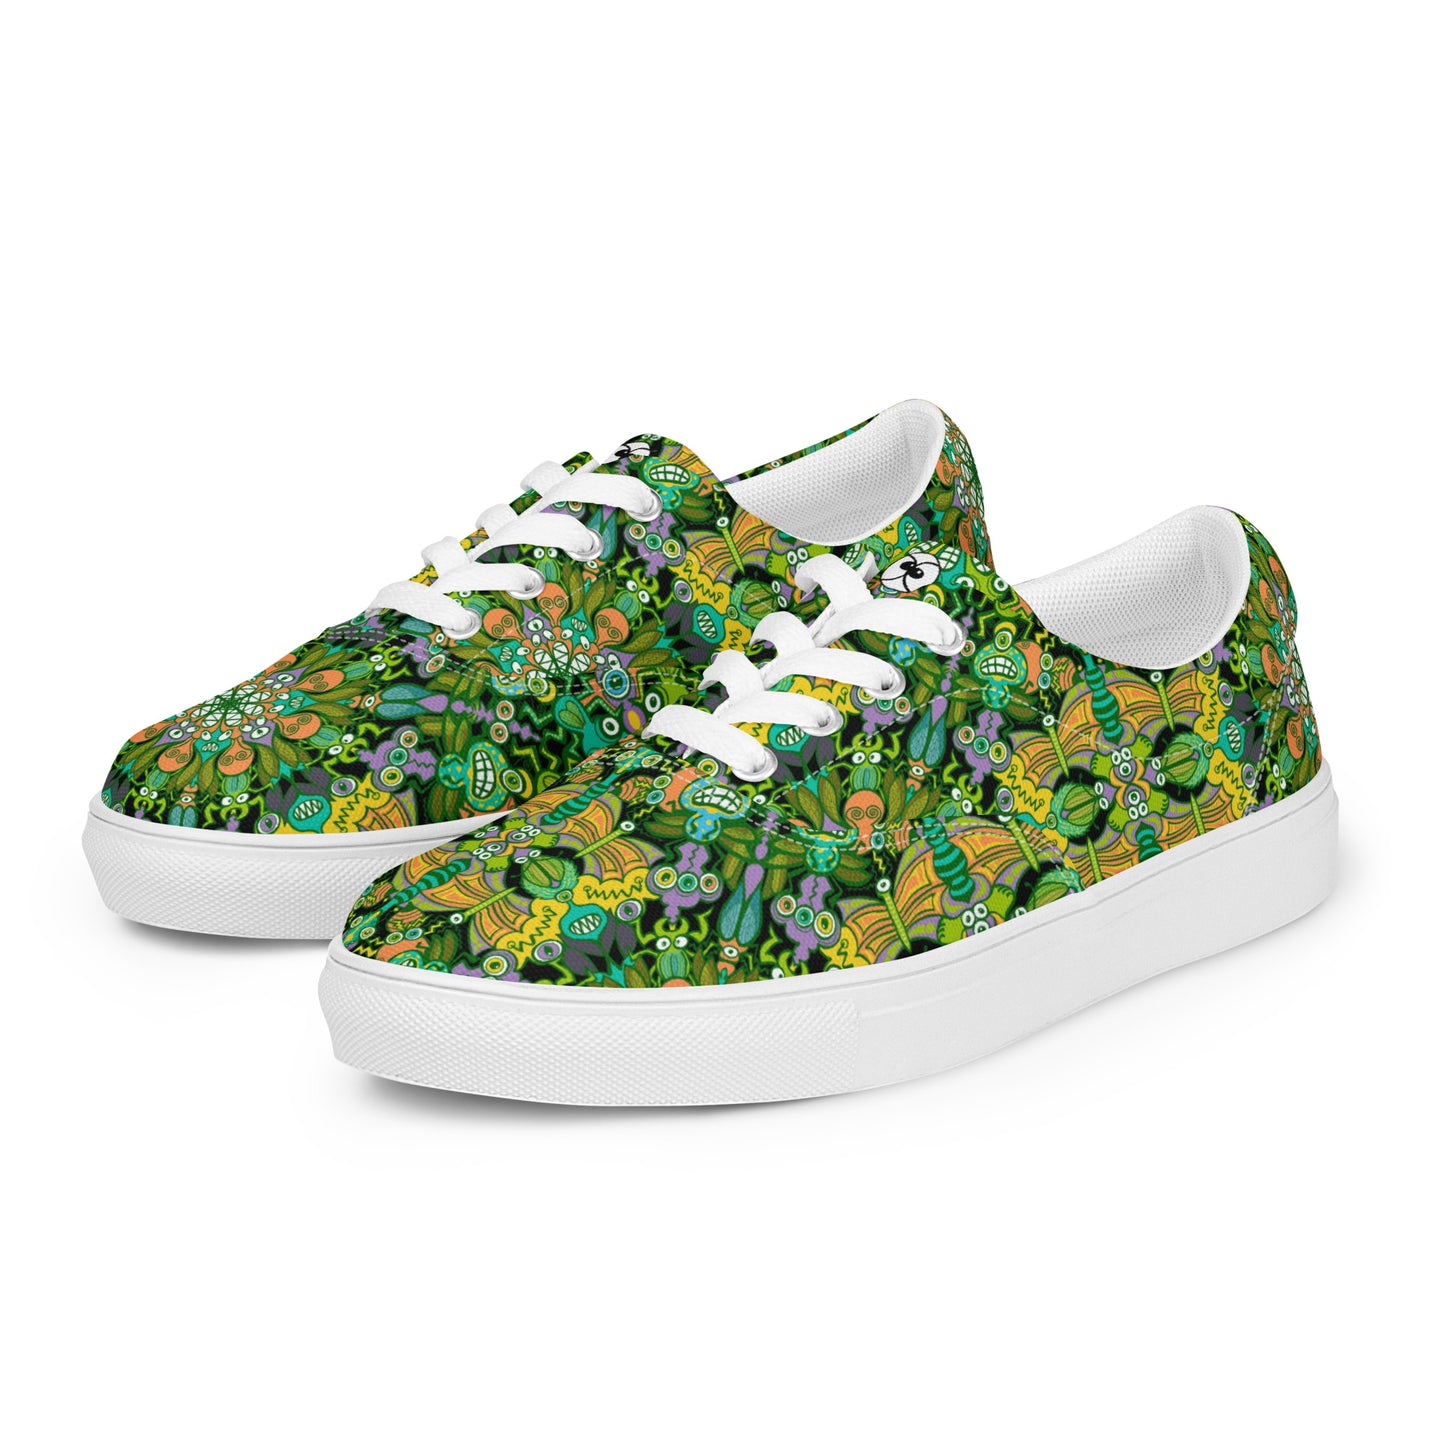 Only for true insects lovers pattern design Men’s lace-up canvas shoes. Overview